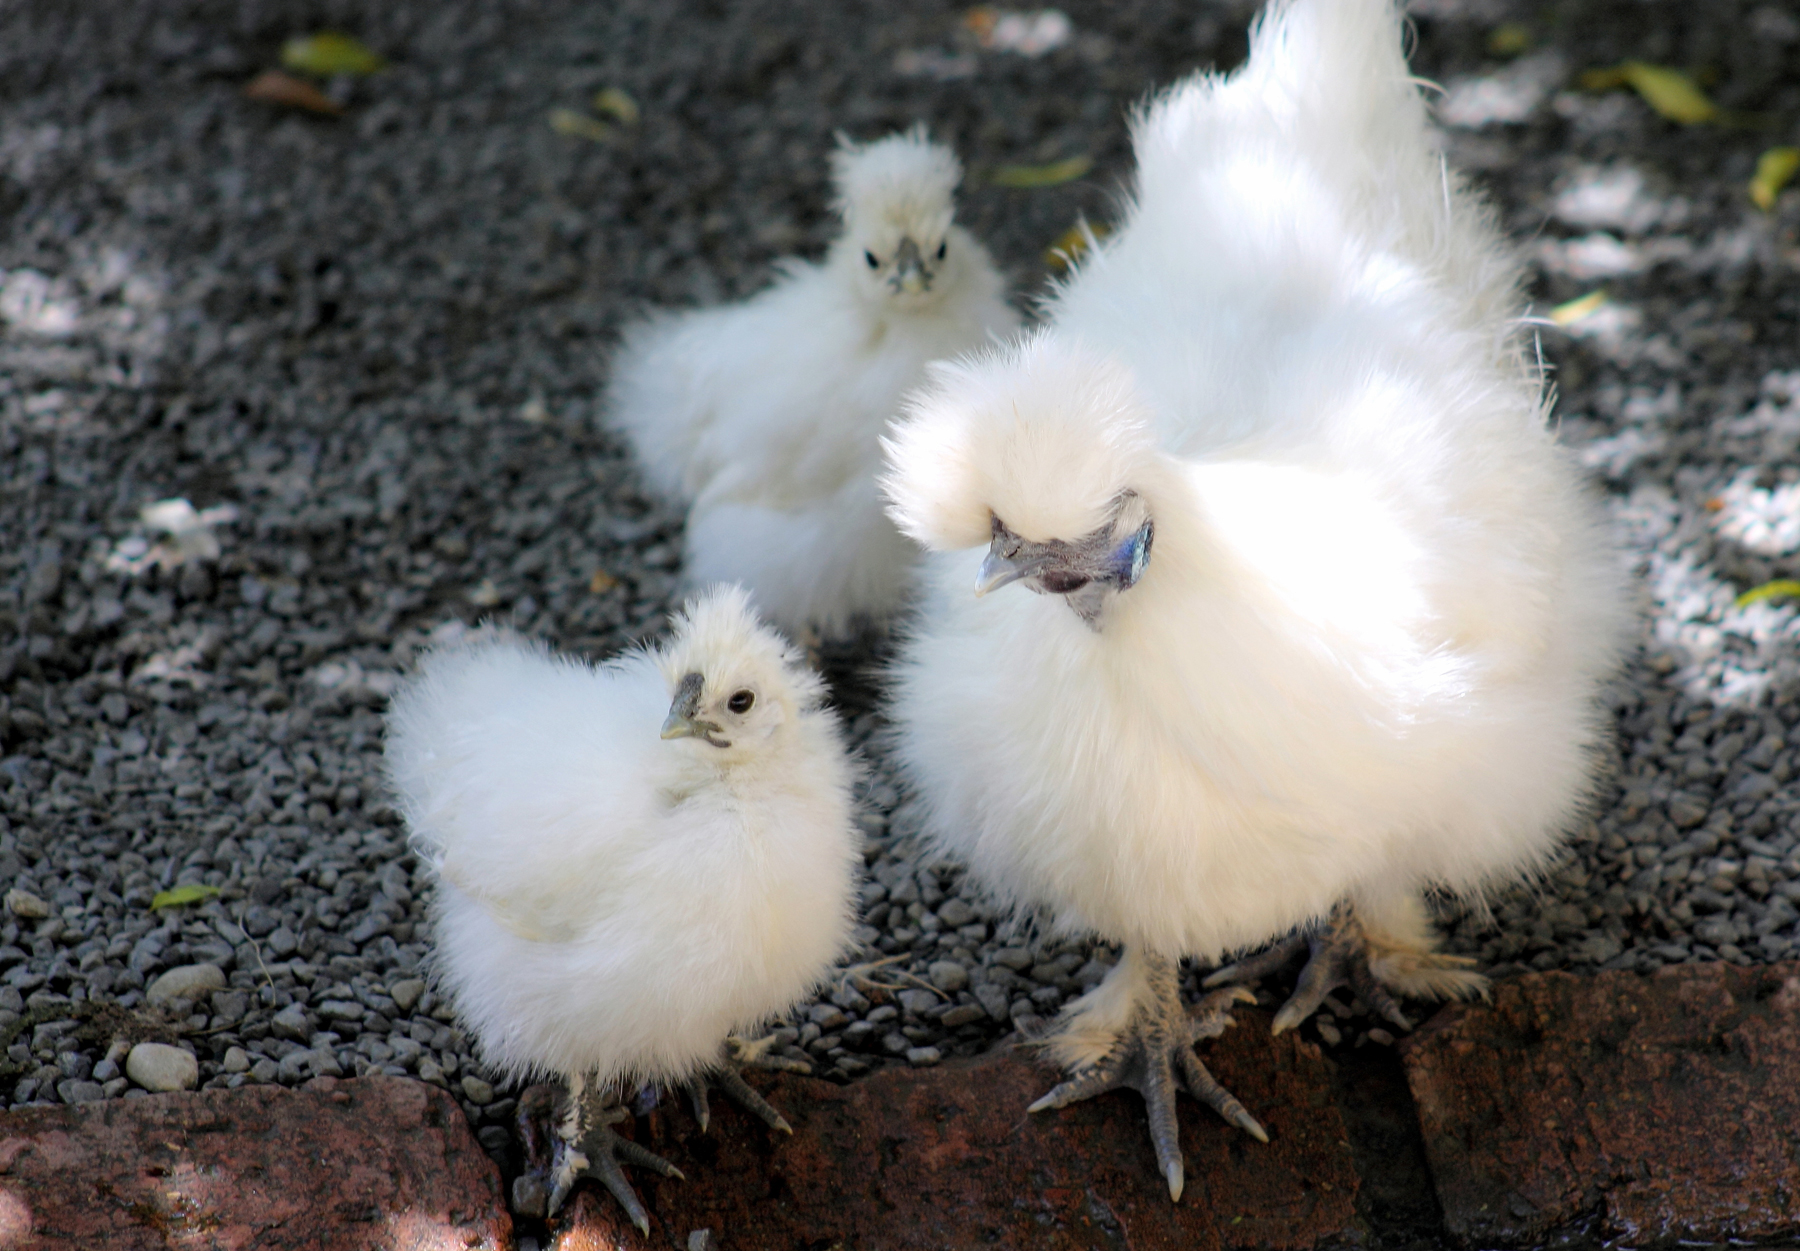 What Chicken Breeds Make the Best Mothers?